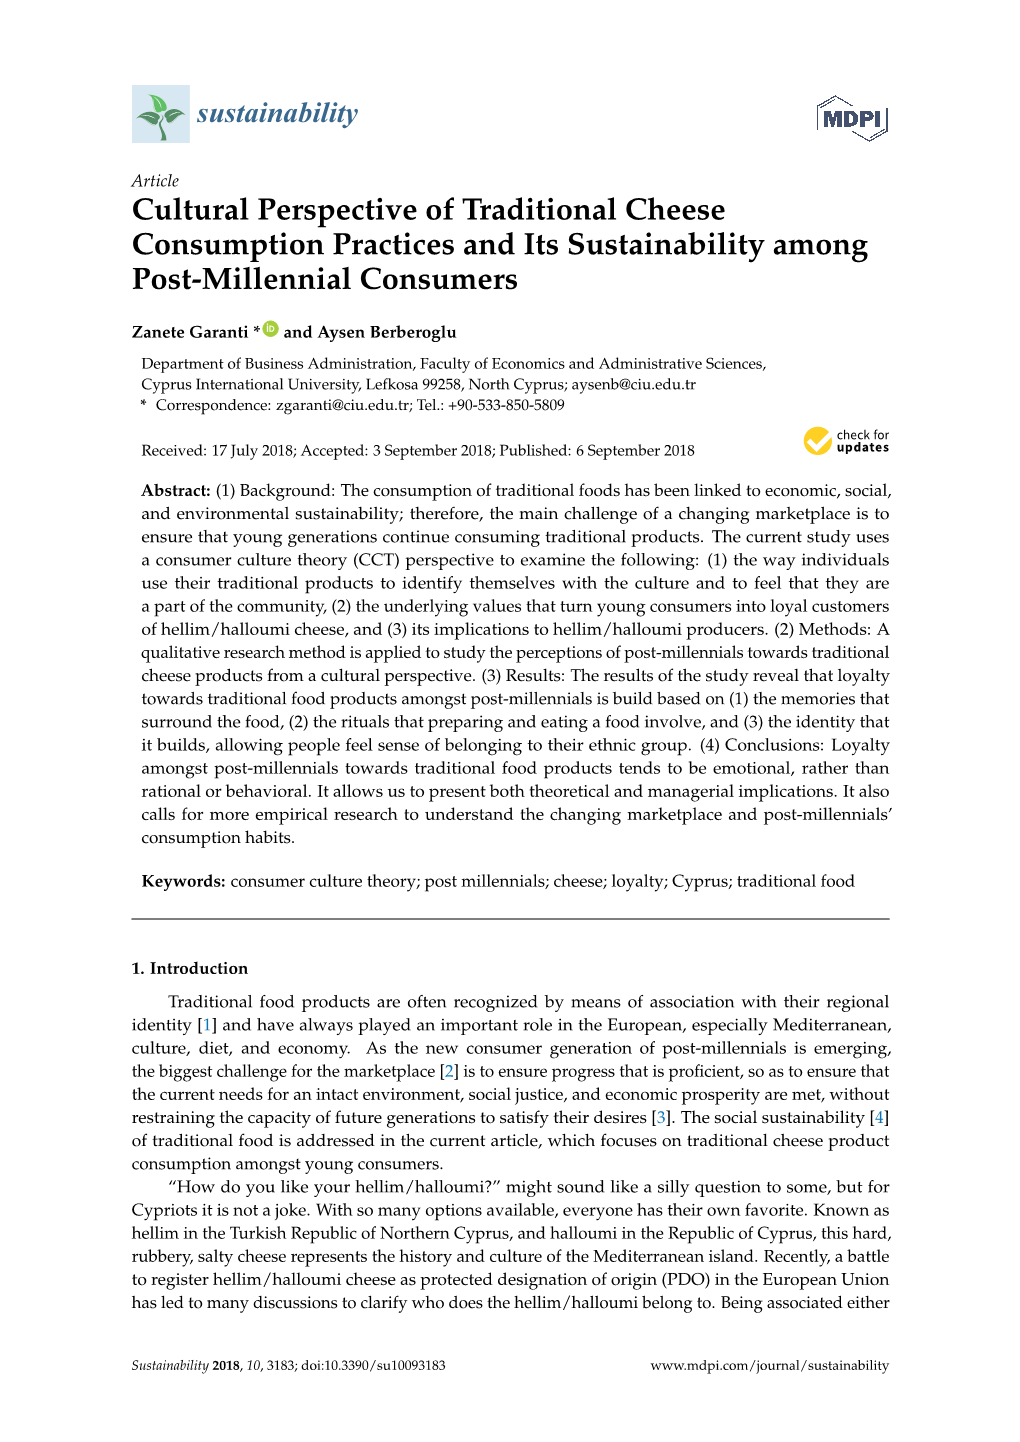 Cultural Perspective of Traditional Cheese Consumption Practices and Its Sustainability Among Post-Millennial Consumers